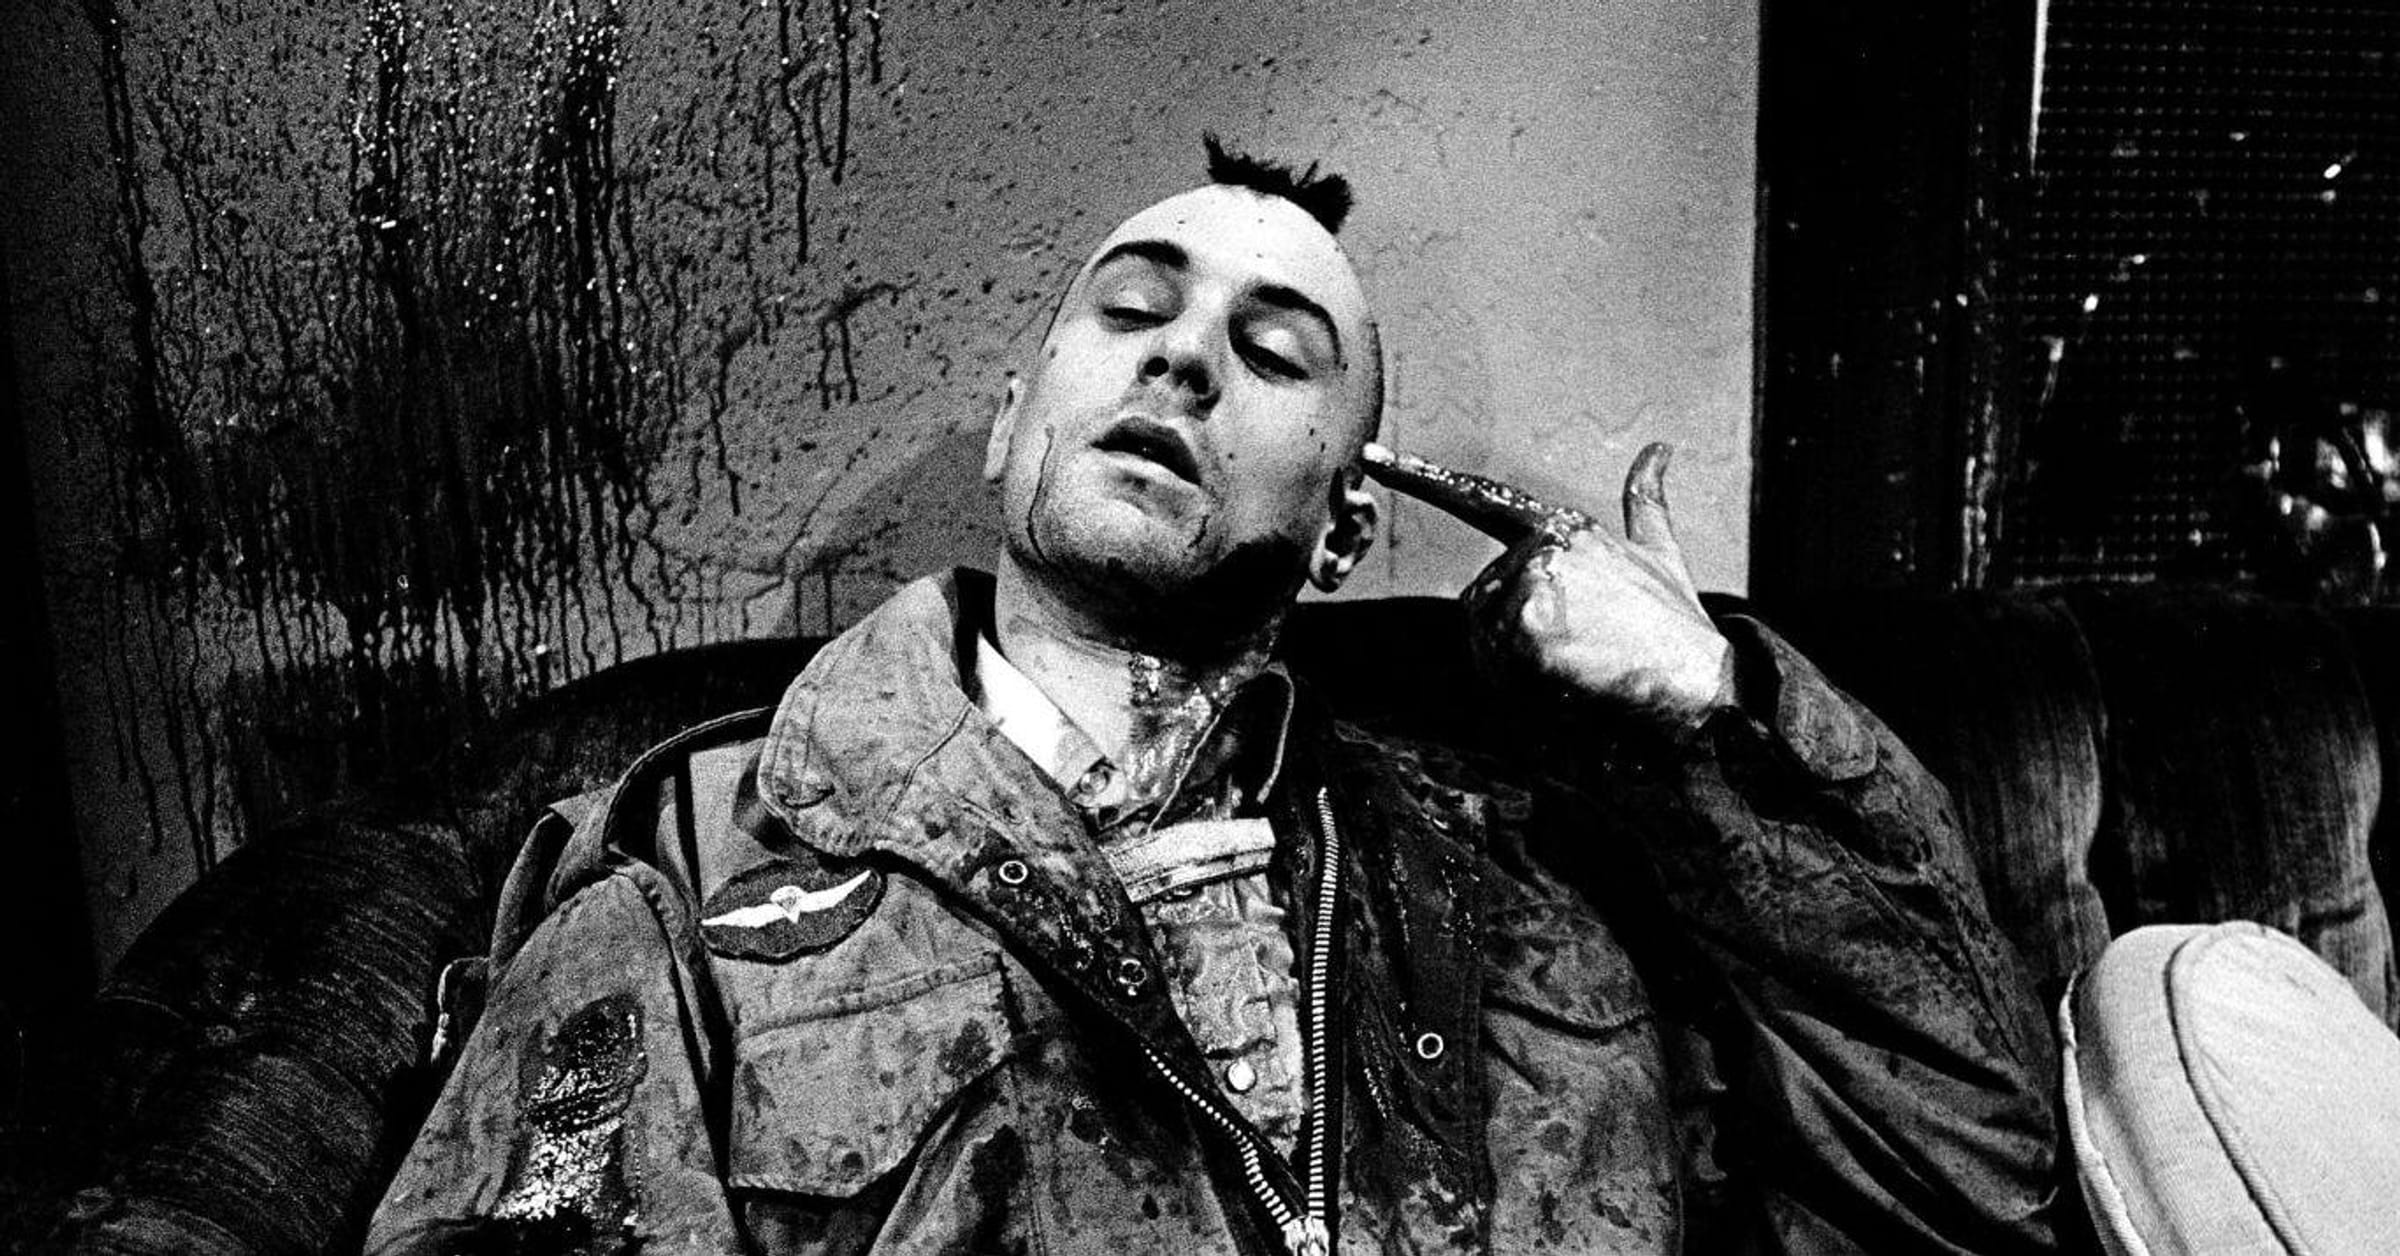 Taxi Driver Behind The Scenes Stories Are Crazier Than The Film Itself